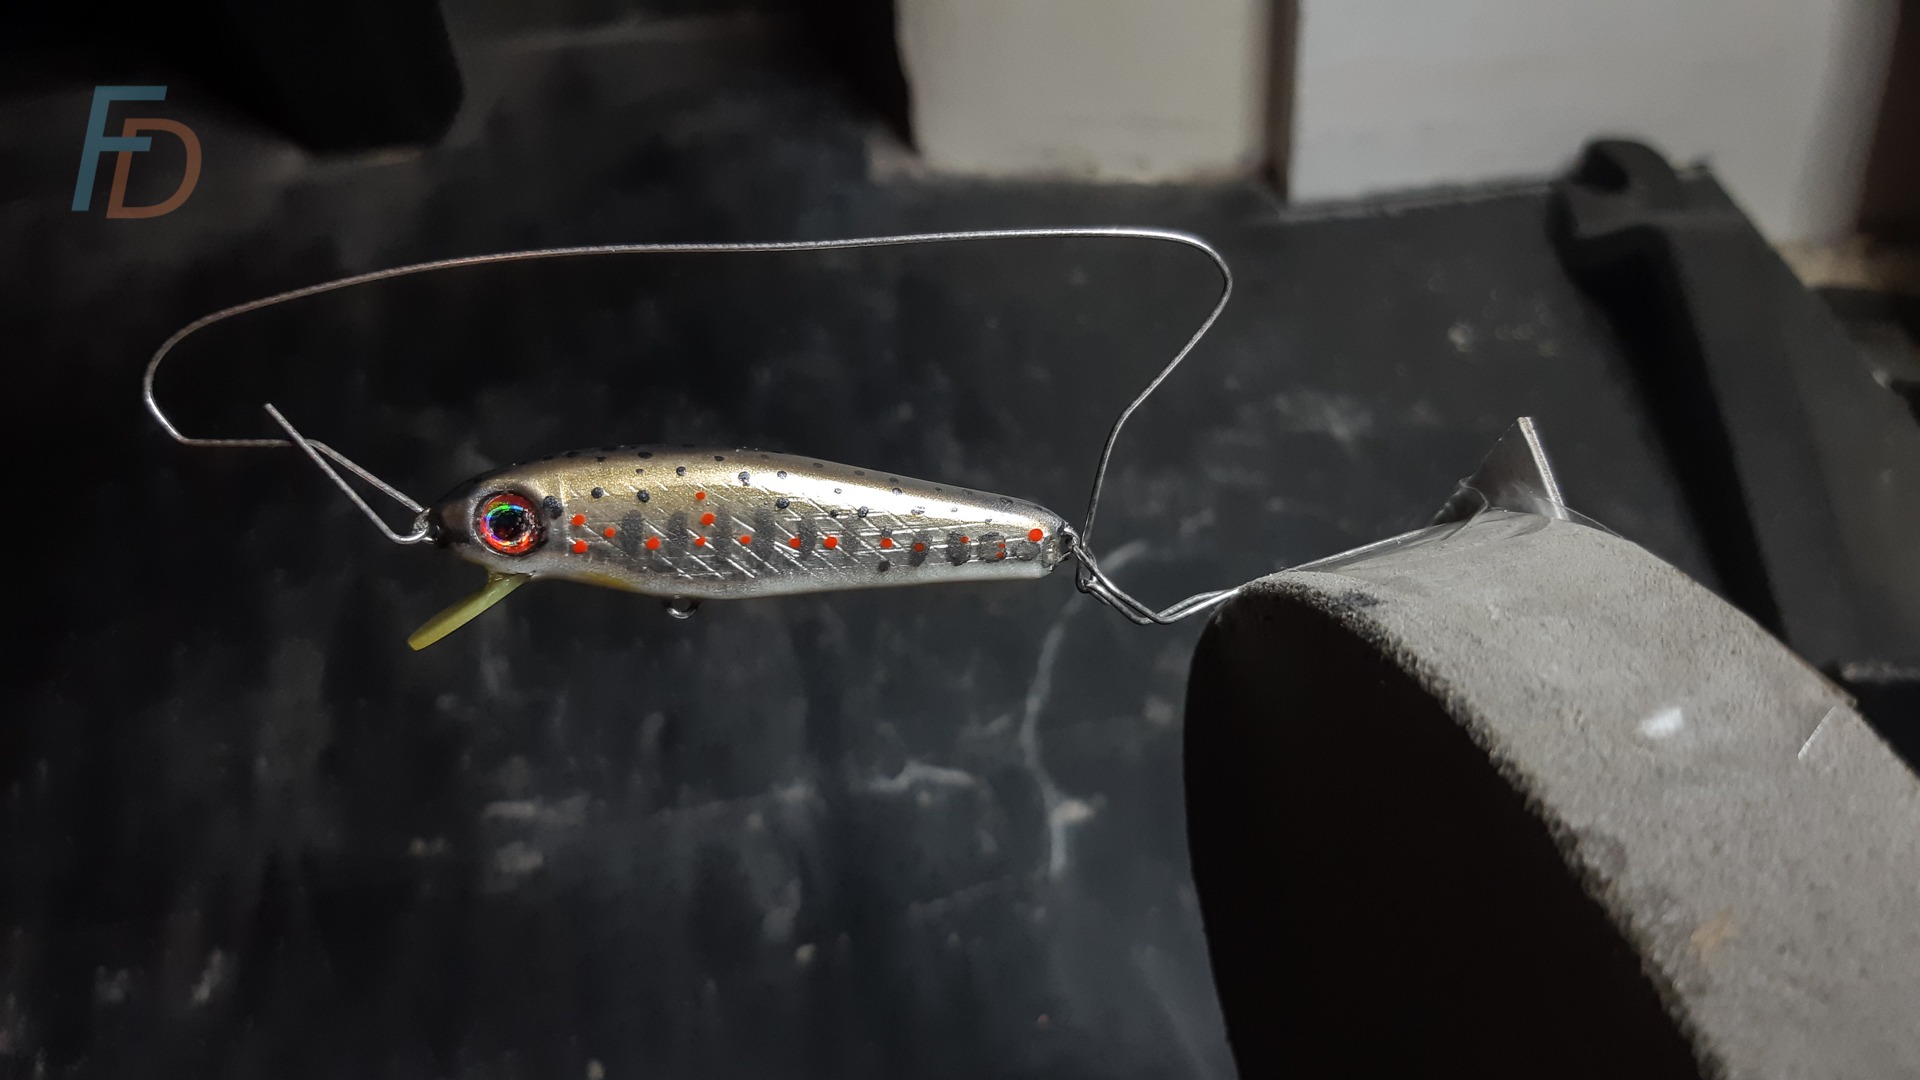 How To Make Fishing Lures, Homemade Fishing Lures See more